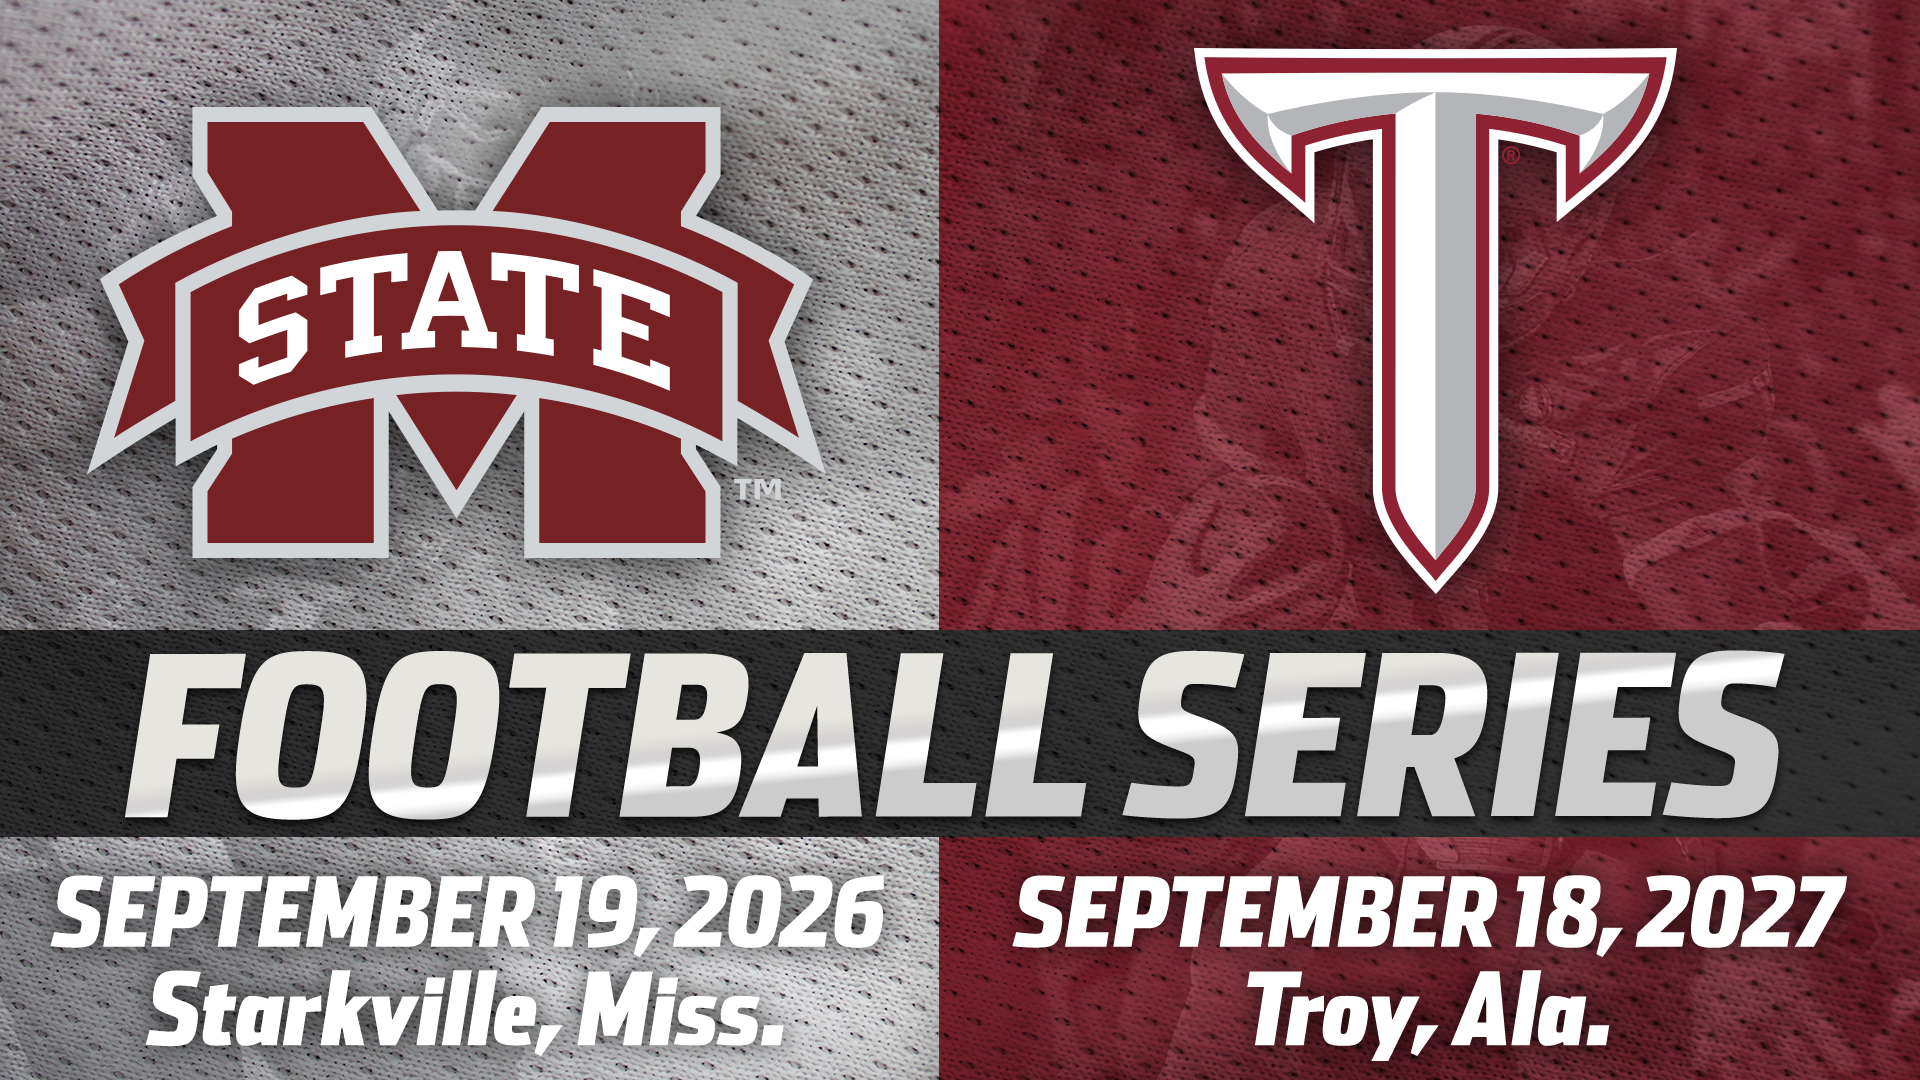 Troy & Mississippi State Sign Home And Home Football - Mississippi State University - HD Wallpaper 